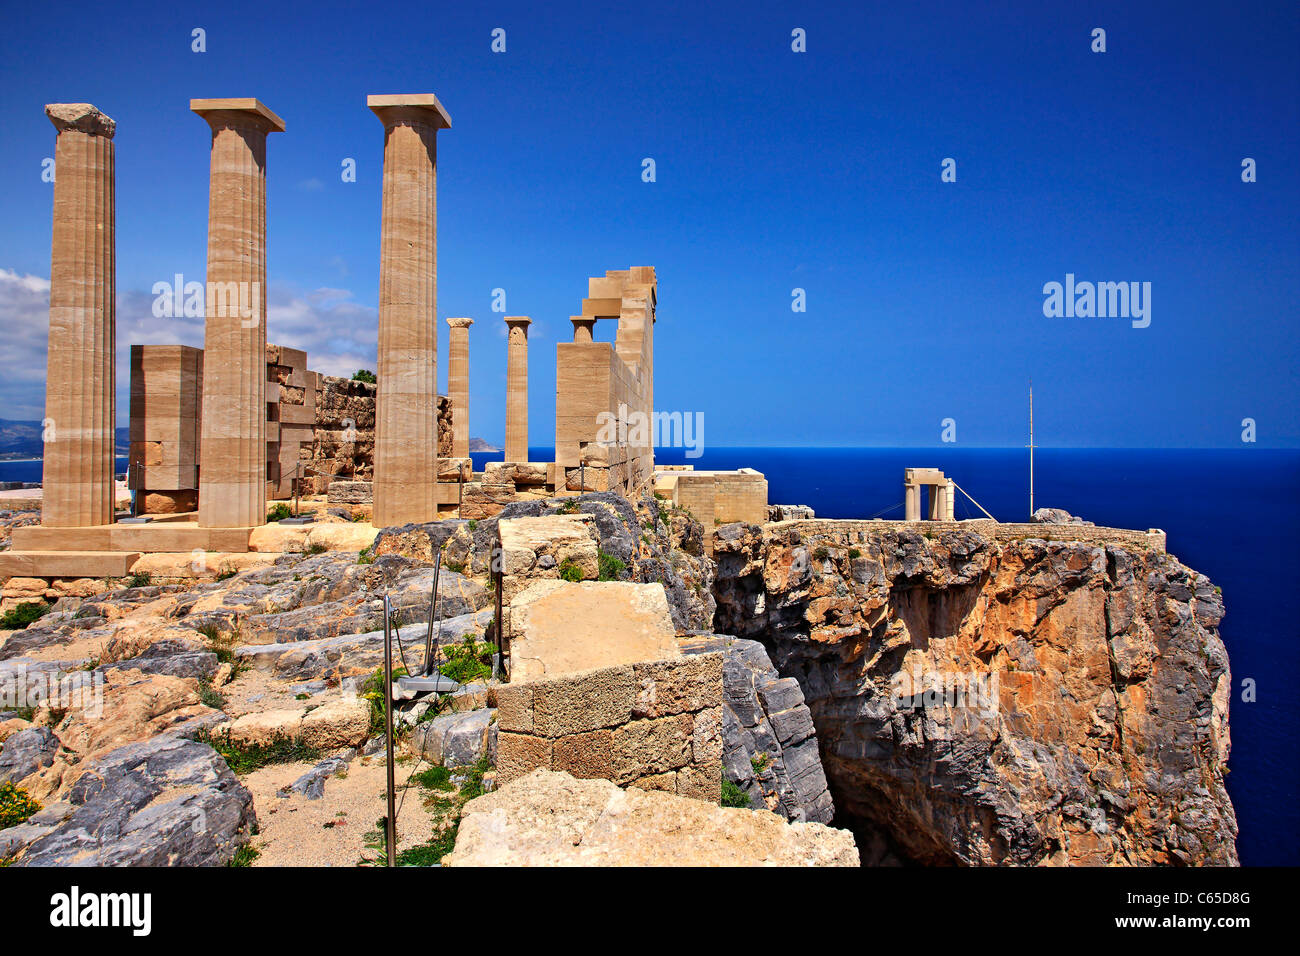 The ancient Temple of Athena Lindia, on the Acropolis of Lindos town, Rhodes island, Dodecanese, Greece Stock Photo